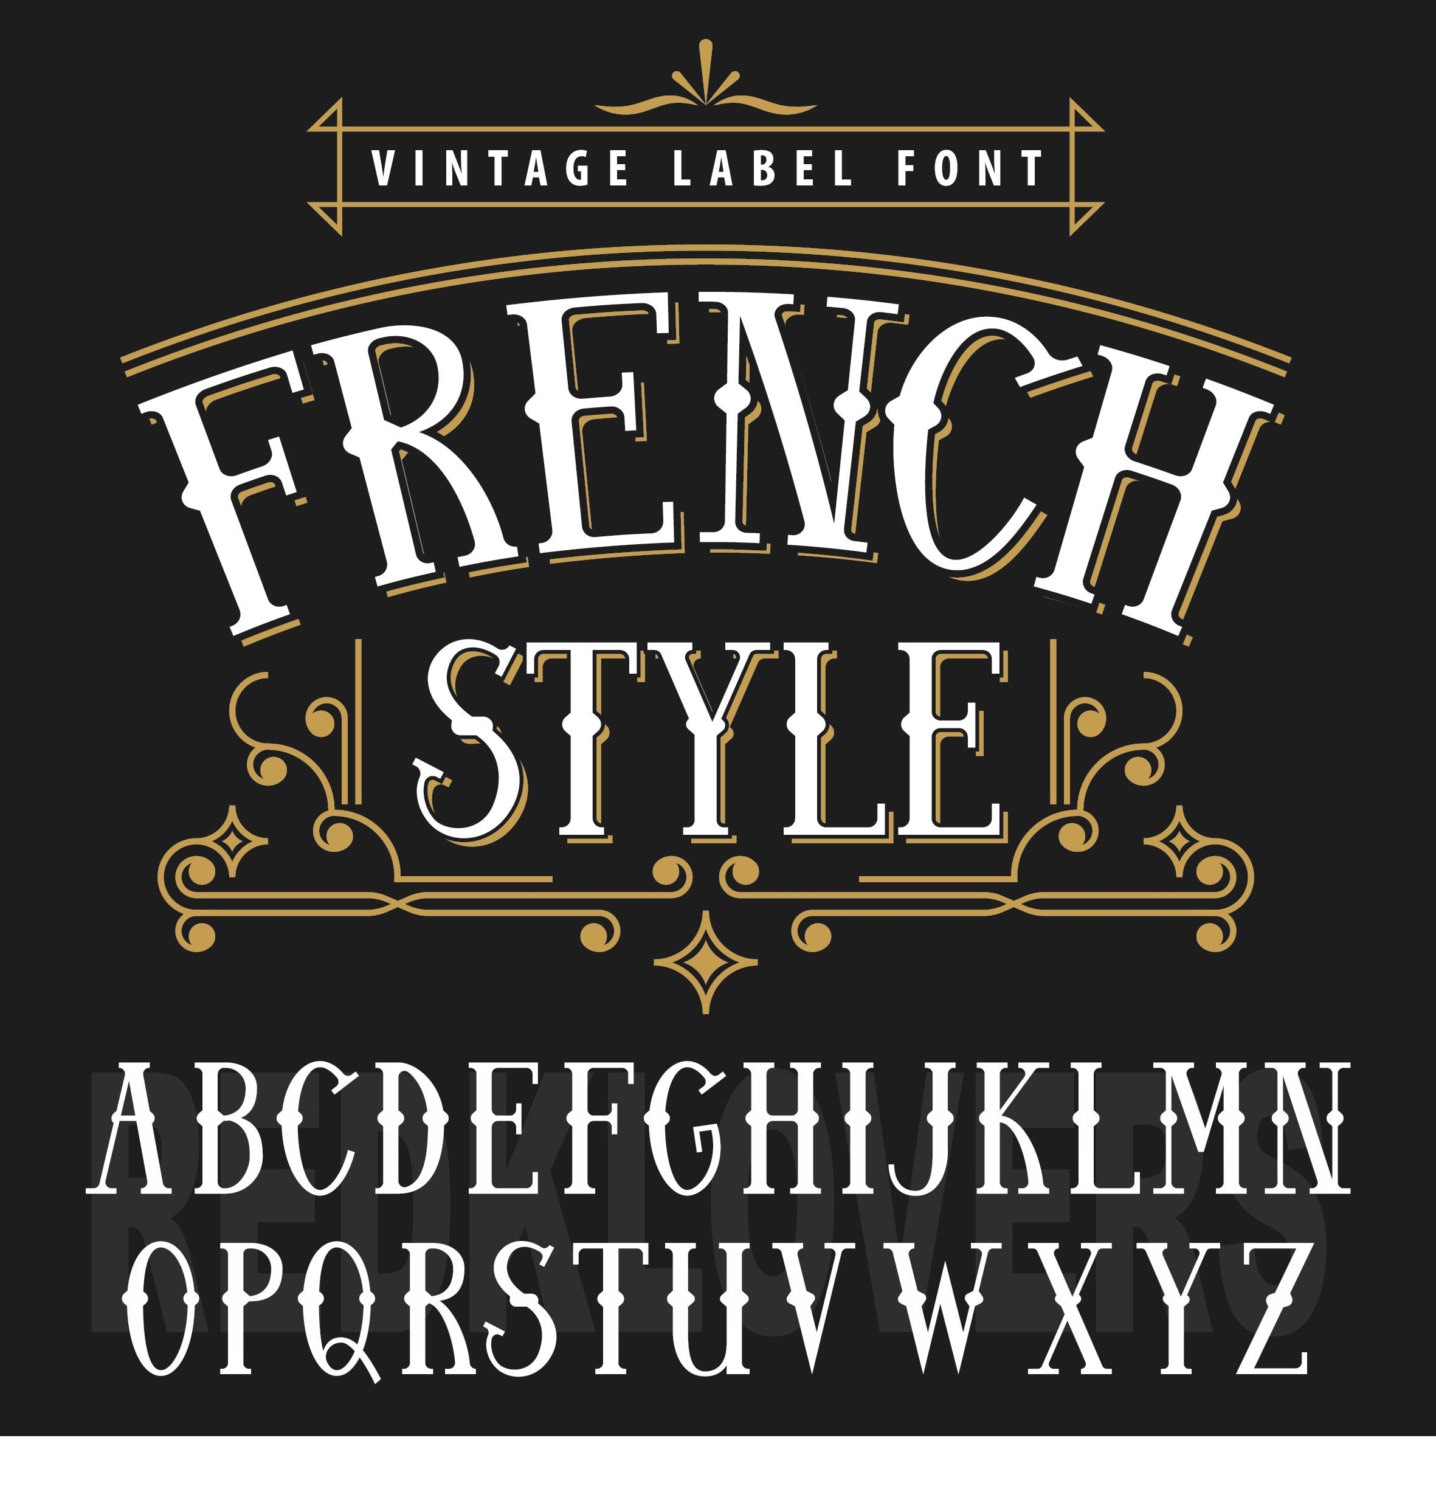 Download SVG Silhouette DXF Vintage Font French sign apothecary Chalk